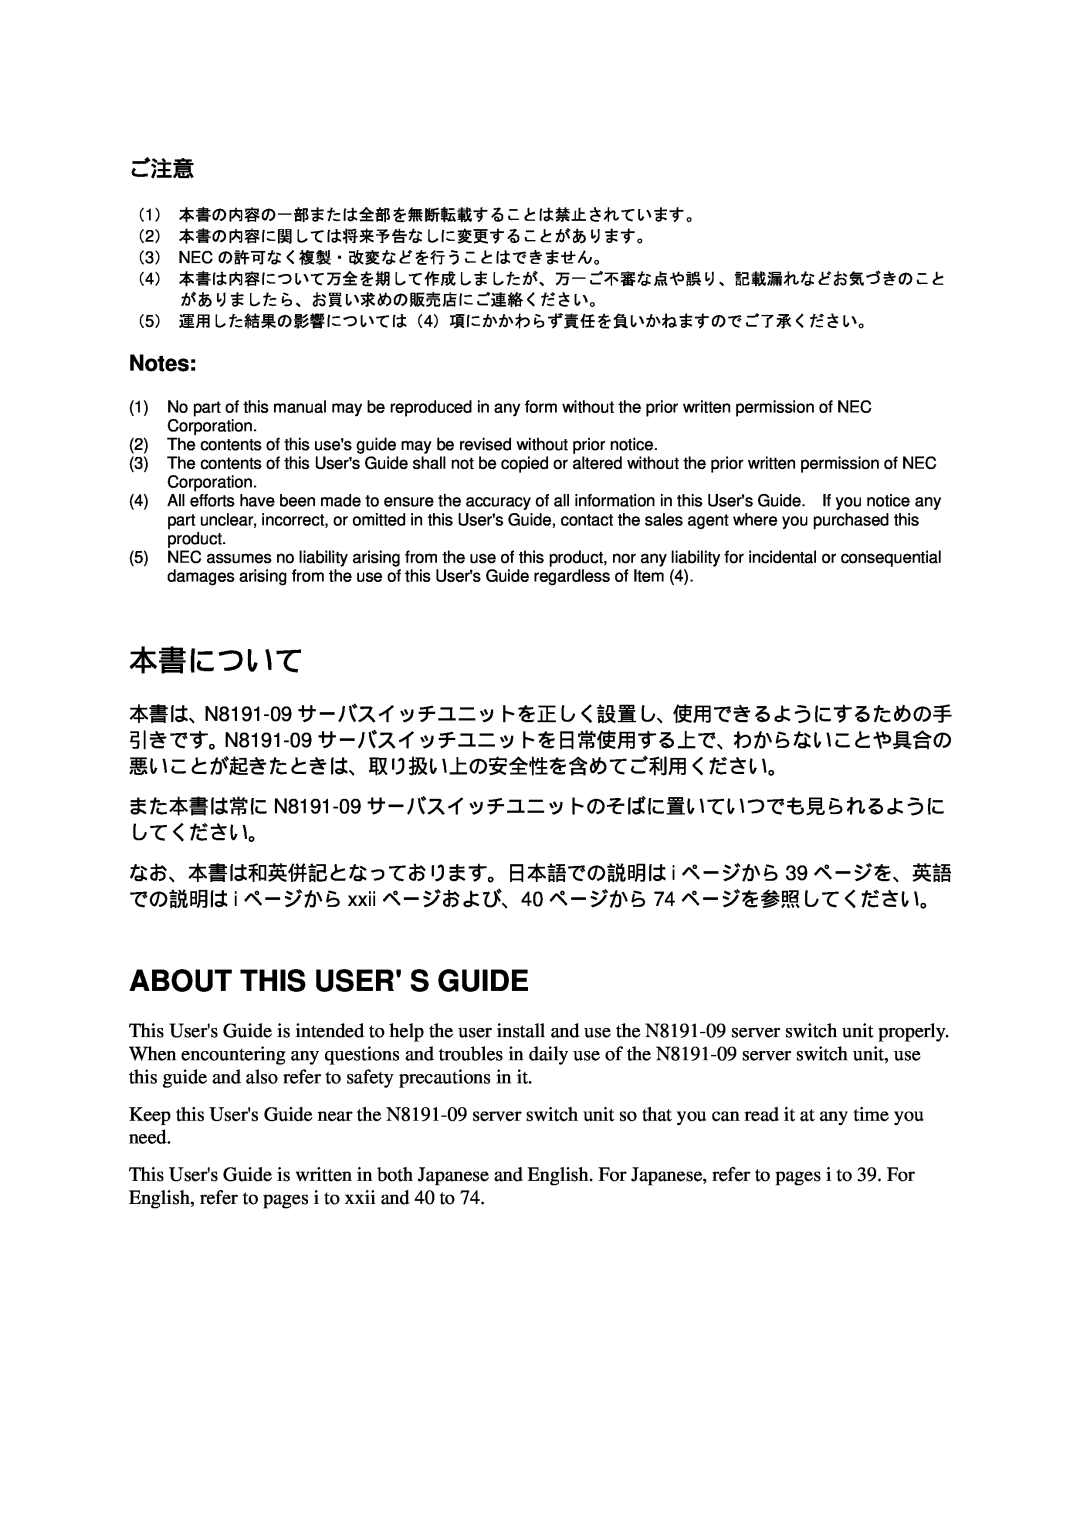 NEC N8191-09 manual 本書について, About This User S Guide 